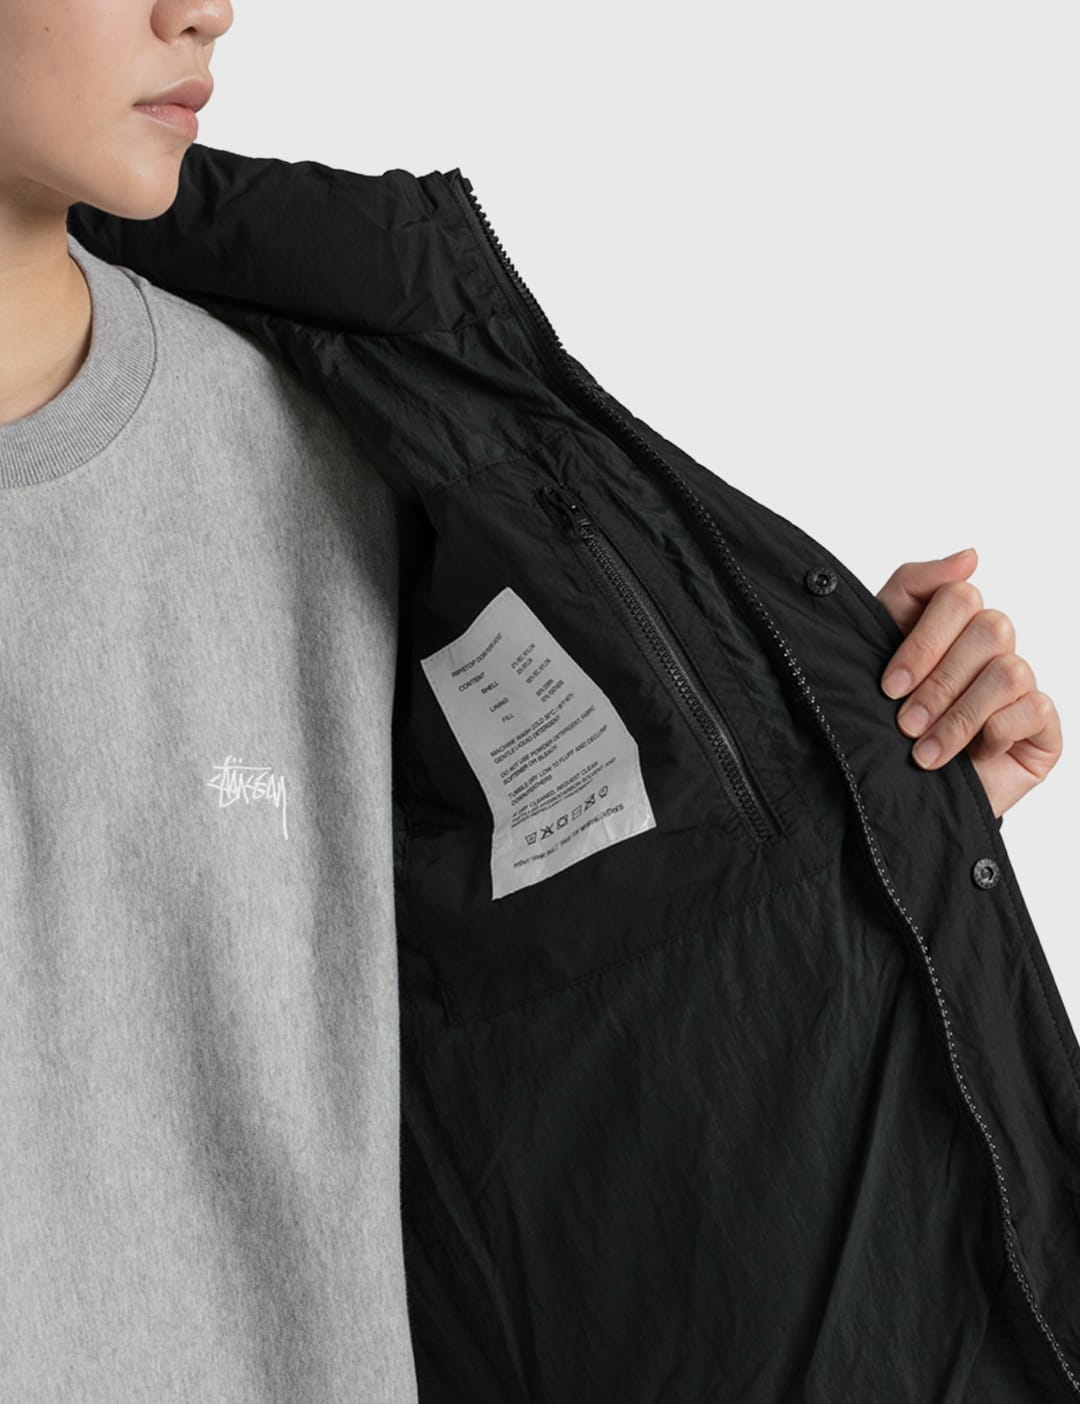 Stüssy   Ripstop Down Puffer Jacket   HBX   Globally Curated